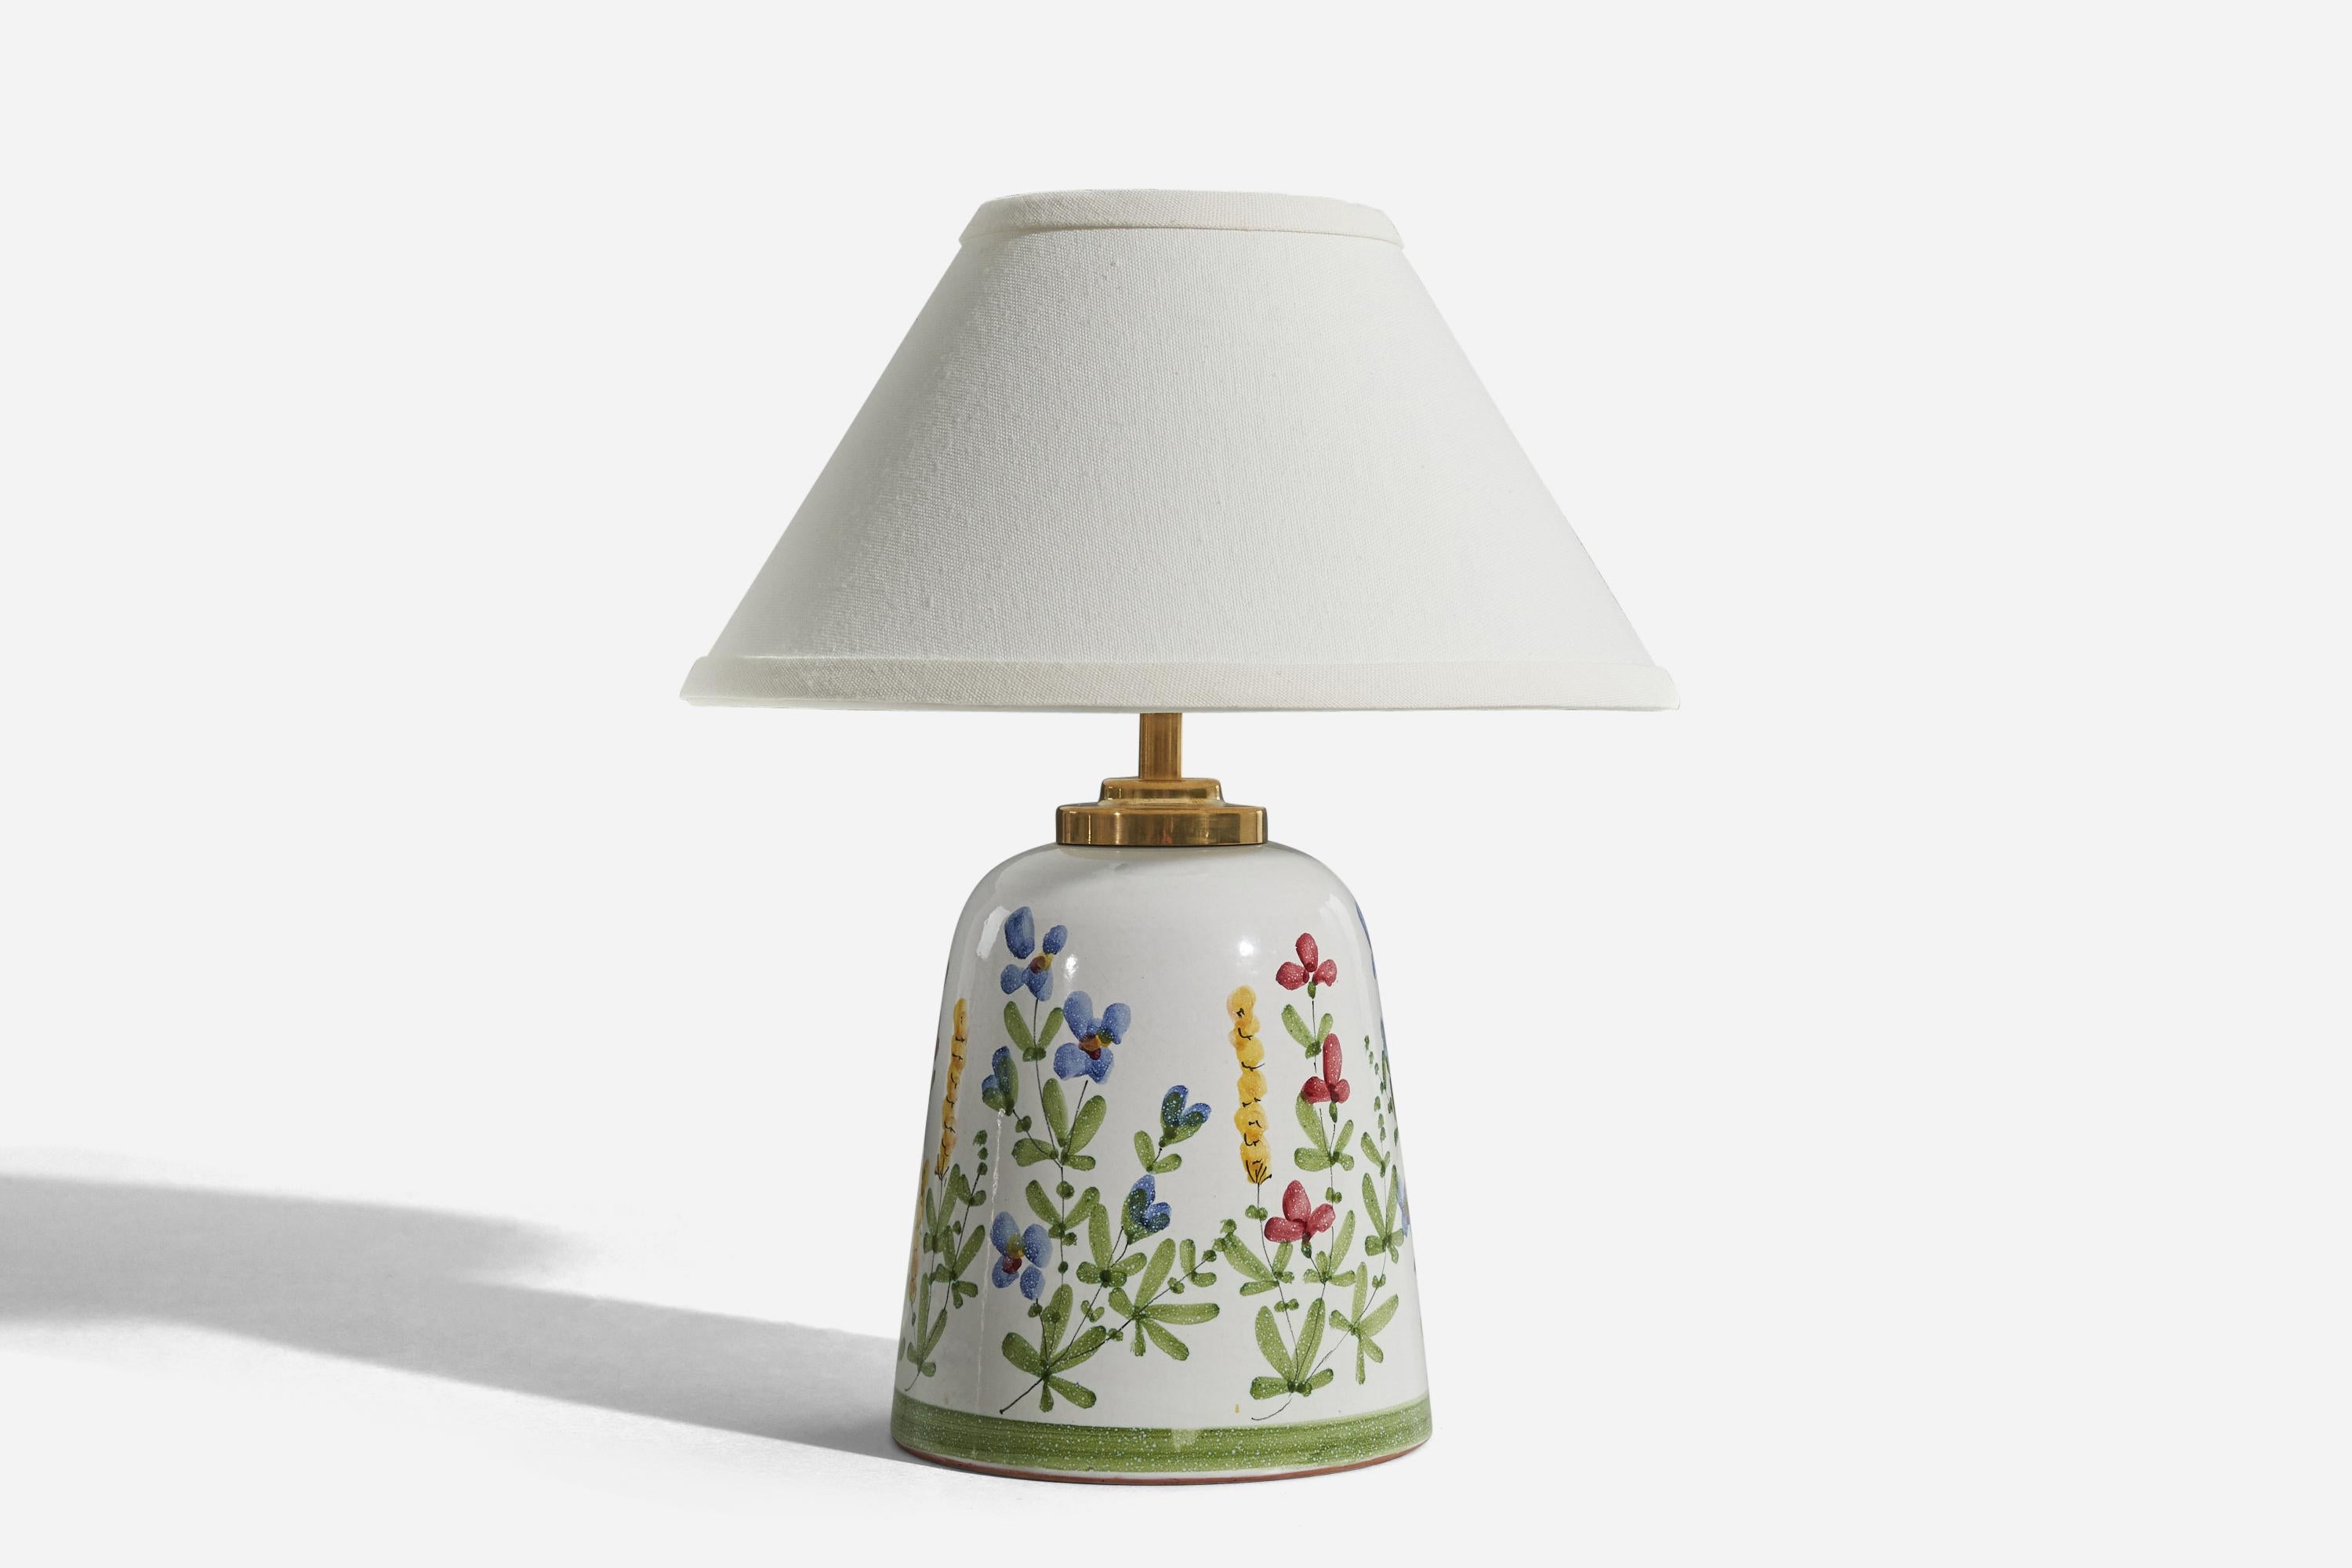 A glazed ceramic table lamp designed by Olof Larsson and produced by Laholm Keramik, Sweden, c. 1950s. 

Sold without lampshade. 
Dimensions of Lamp (inches) : 10.5 x 5.75 x 5.75 (H x W x D)
Dimensions of Shade (inches) : 4.25 x 10.25 x 6 (T x B